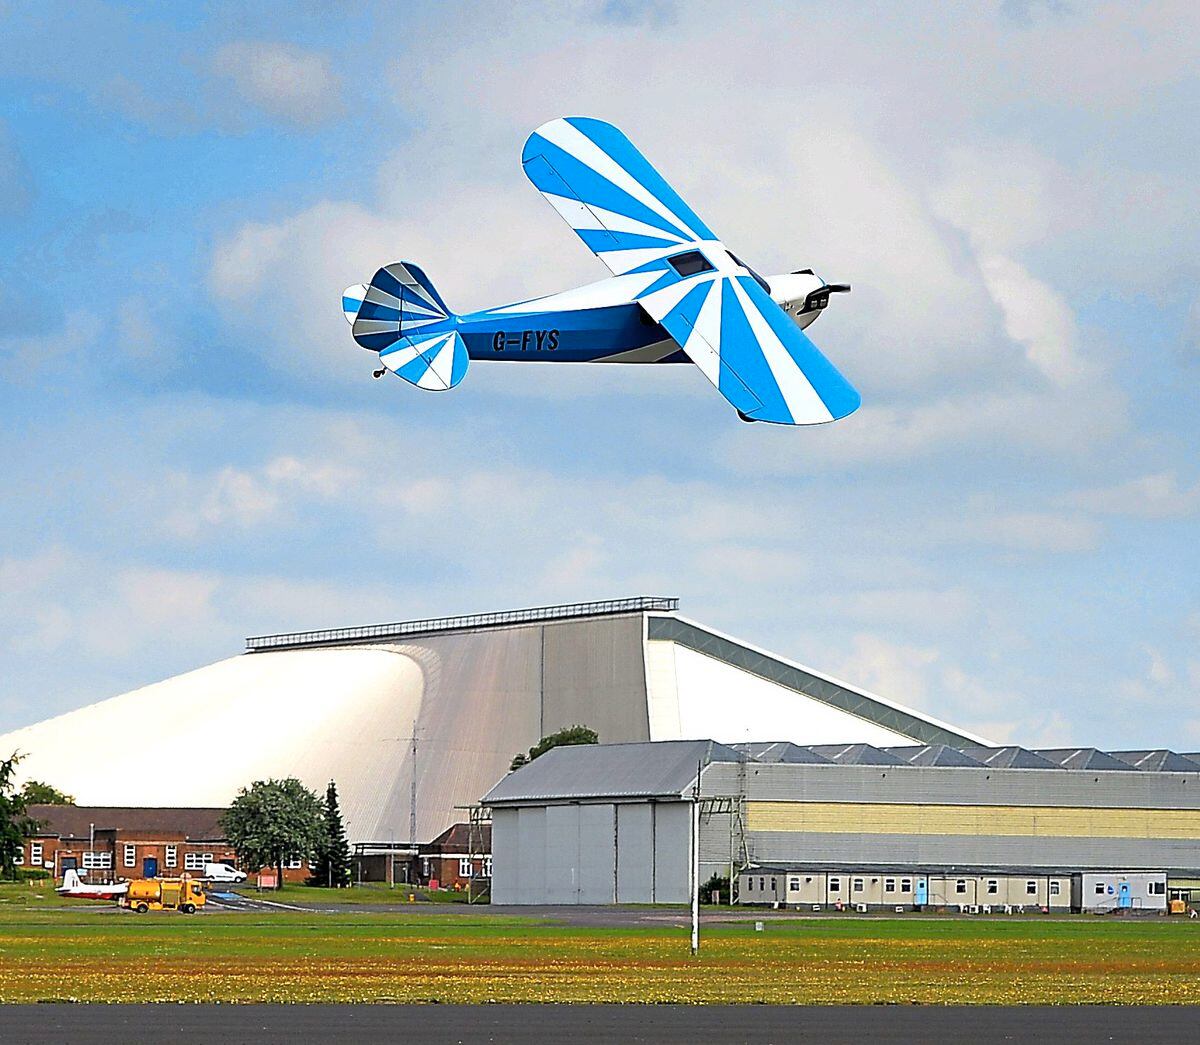 The large model aircraft show at RAF Cosford